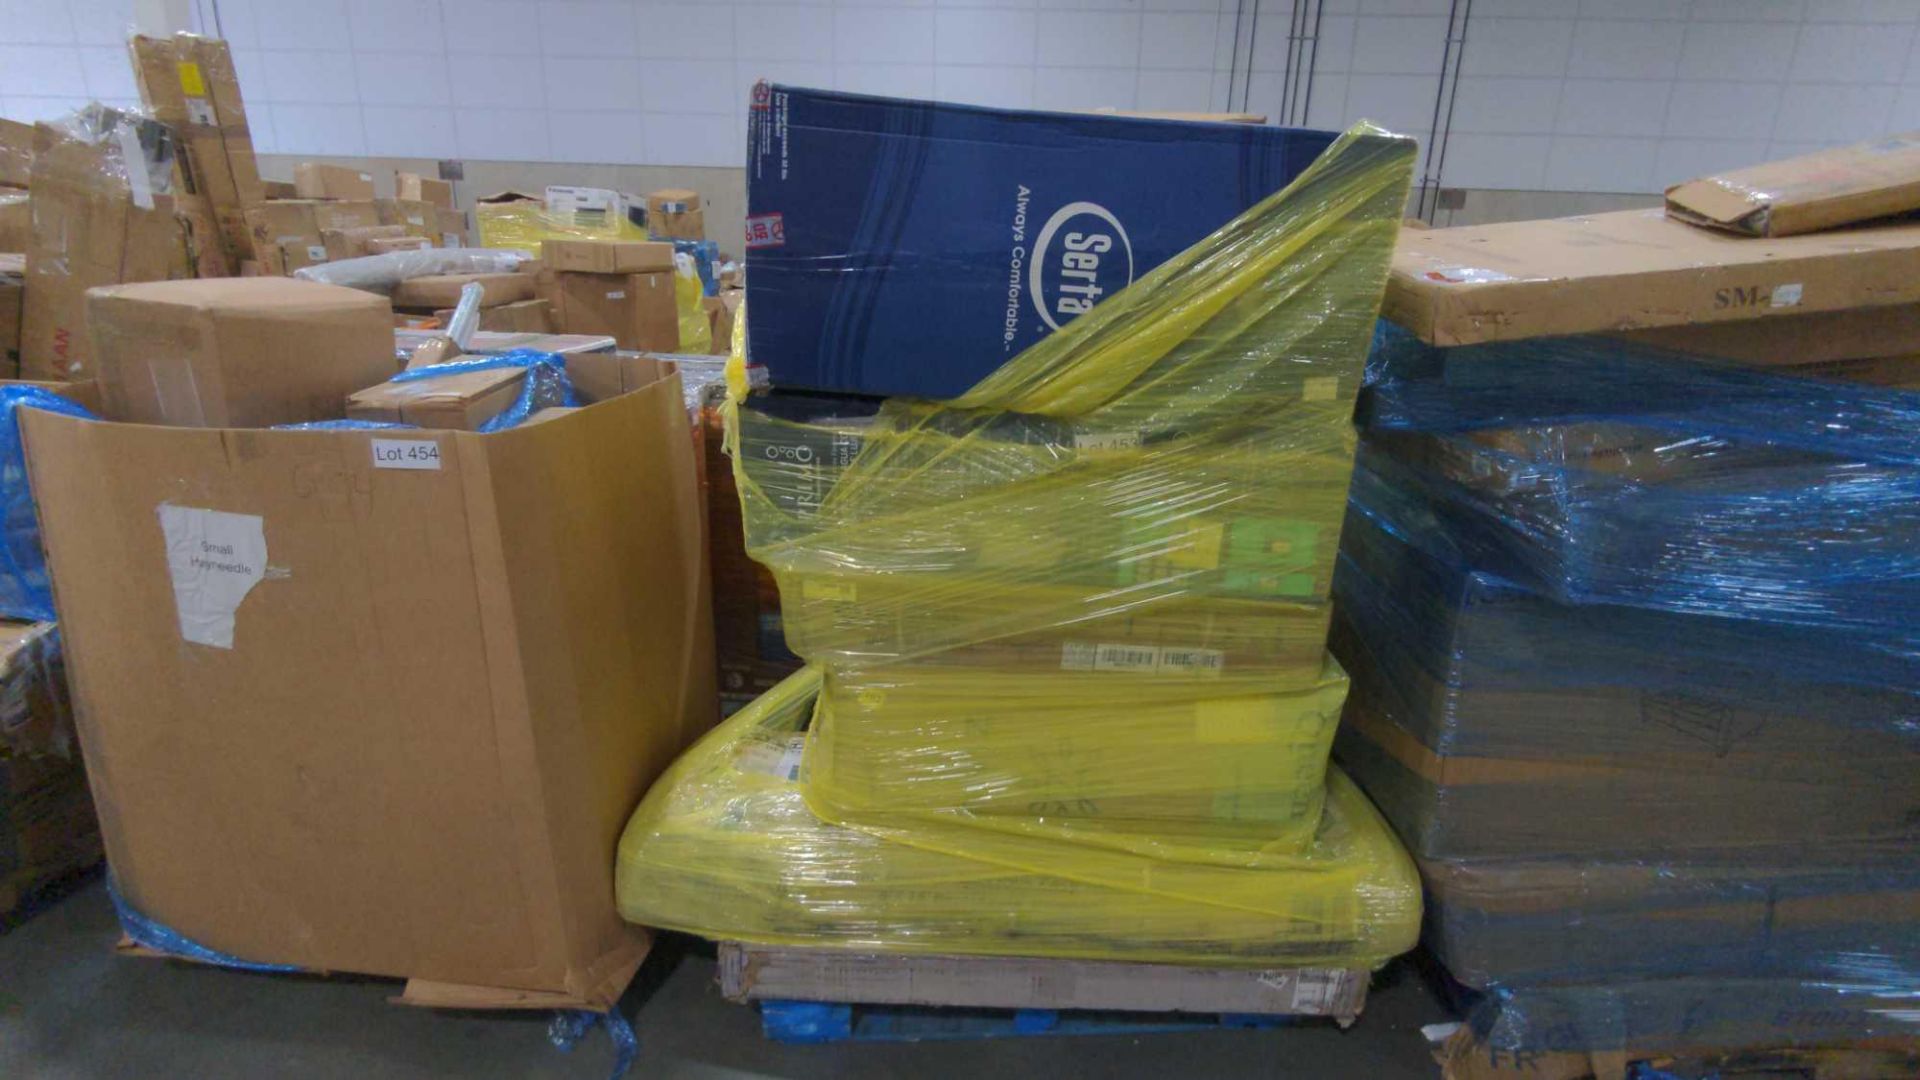 pallet of serta mattresses, primo, furniture and more